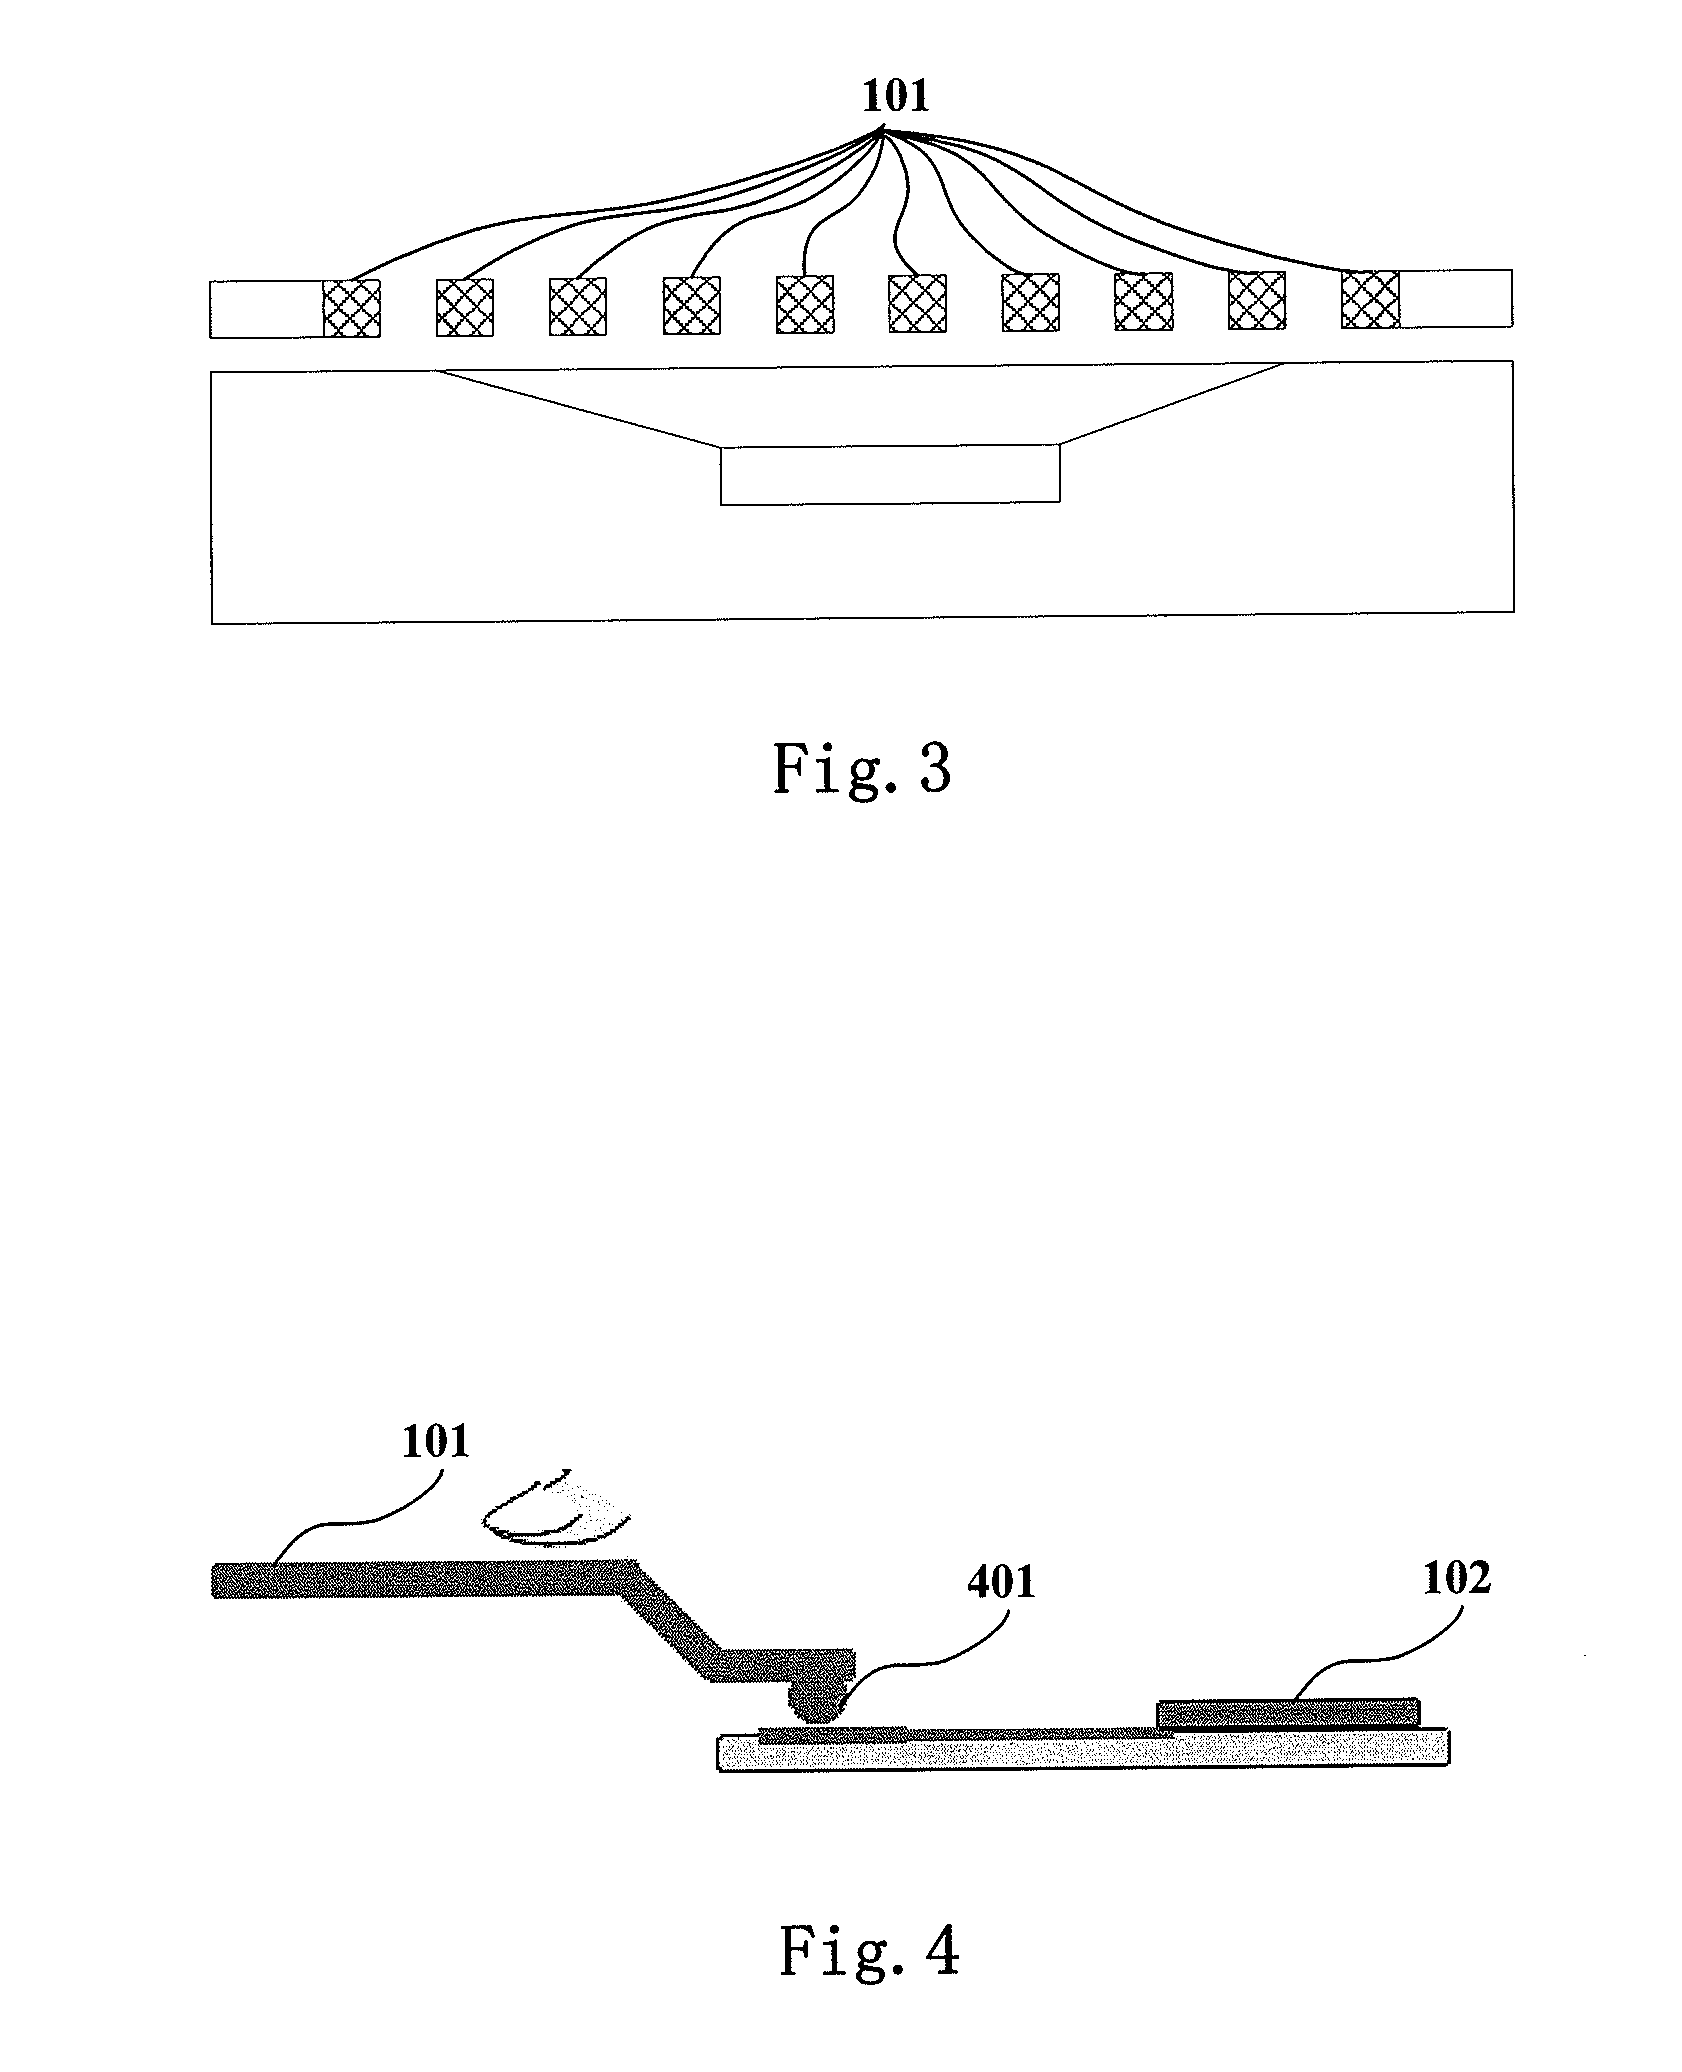 Apparatus and method for sound control and electronic service